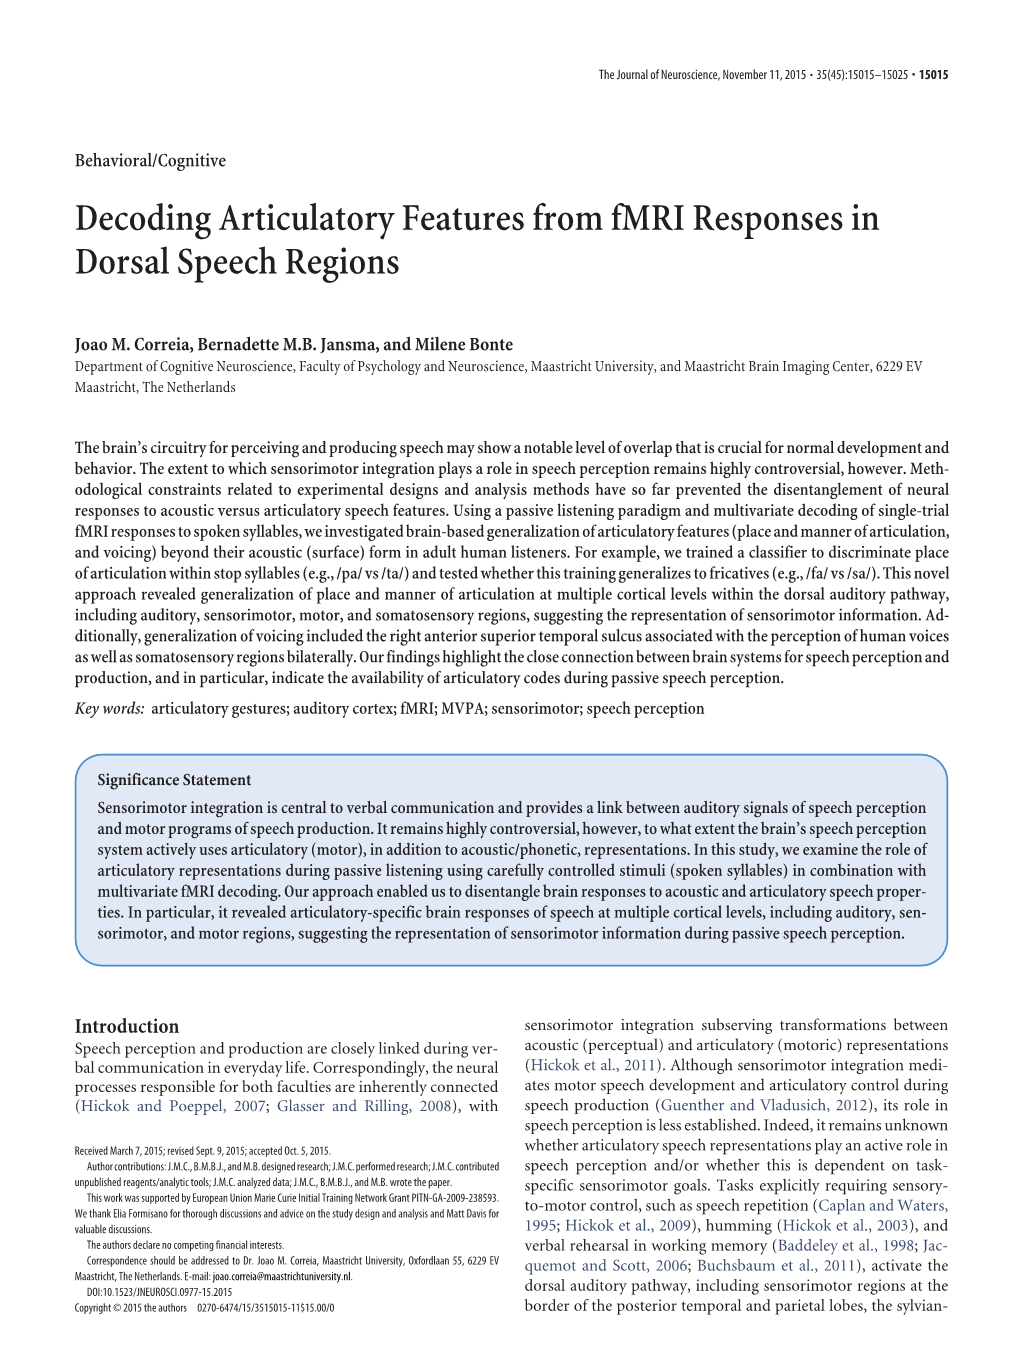 Decoding Articulatory Features from Fmri Responses in Dorsal Speech Regions